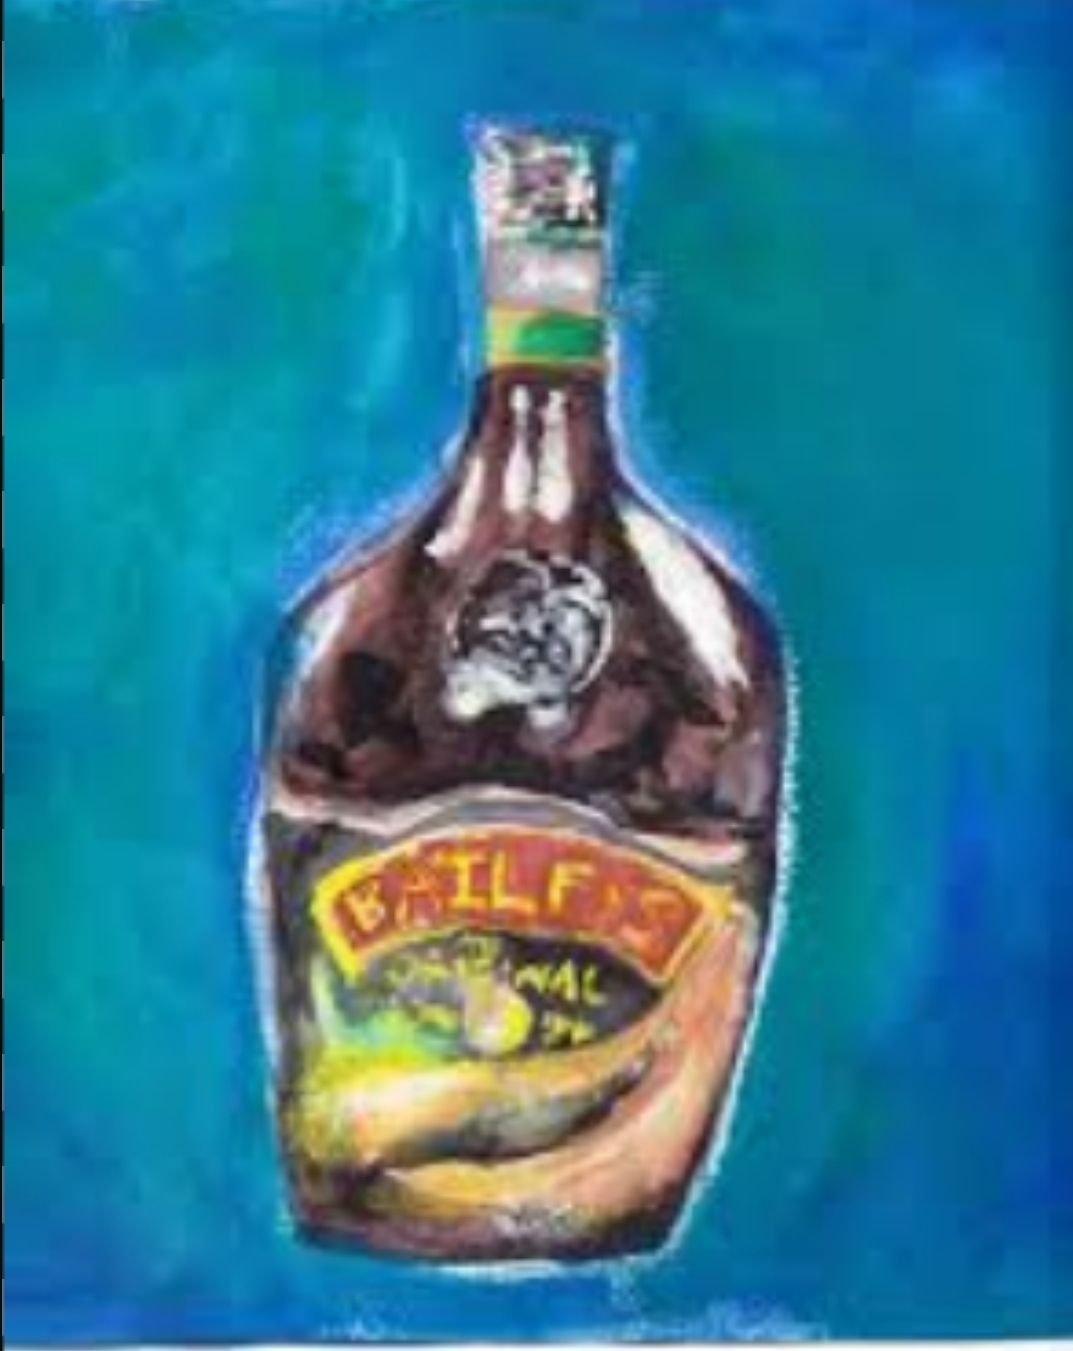 watercolor painting of a bottle of bailey's done in the style of old greg